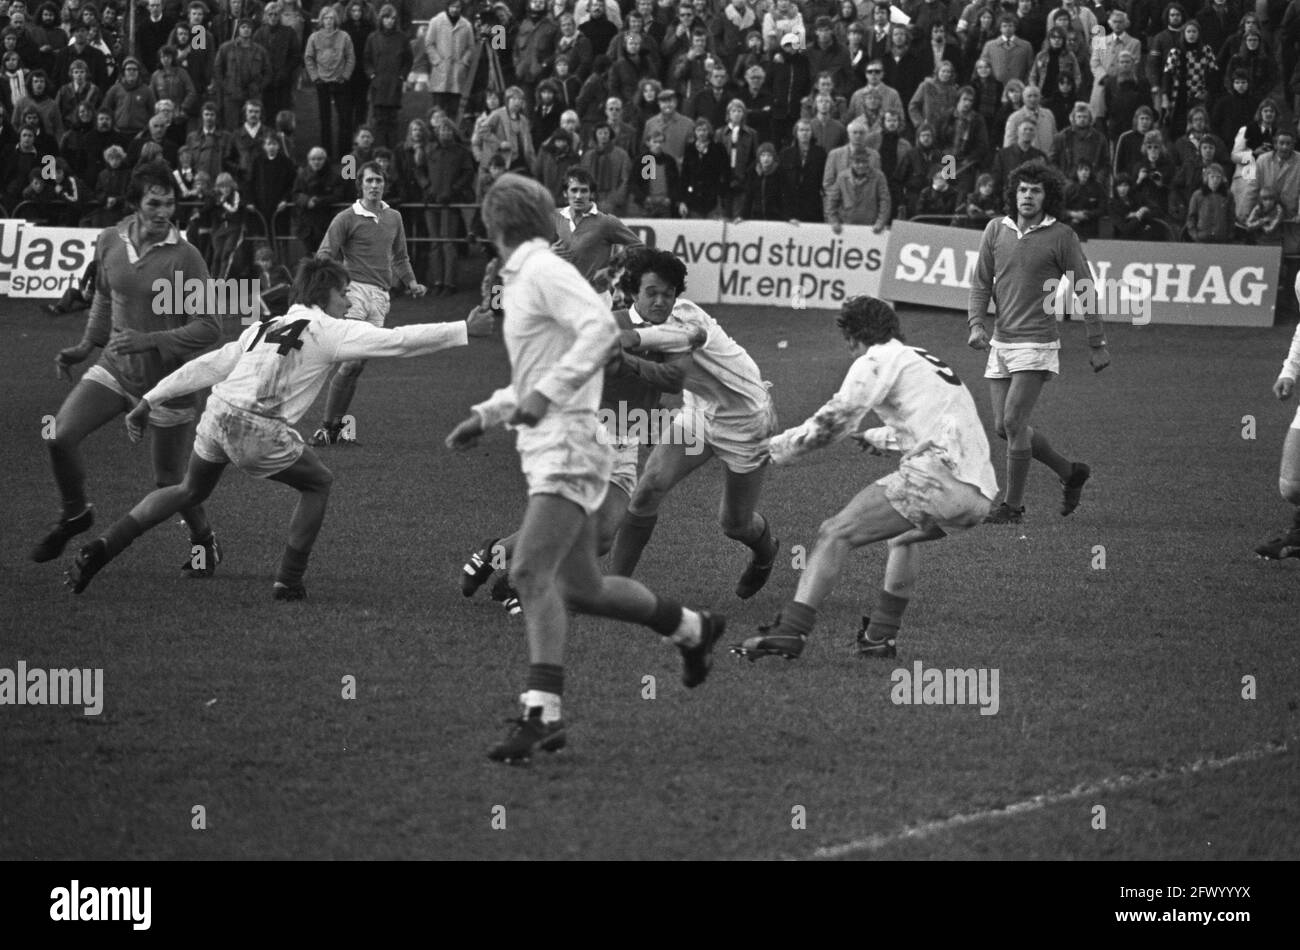 Rugby international Netherlands against West Germany, game moments, October 19, 1974, rugby, The Netherlands, 20th century press agency photo, news to remember, documentary, historic photography 1945-1990, visual stories, human history of the Twentieth Century, capturing moments in time Stock Photo